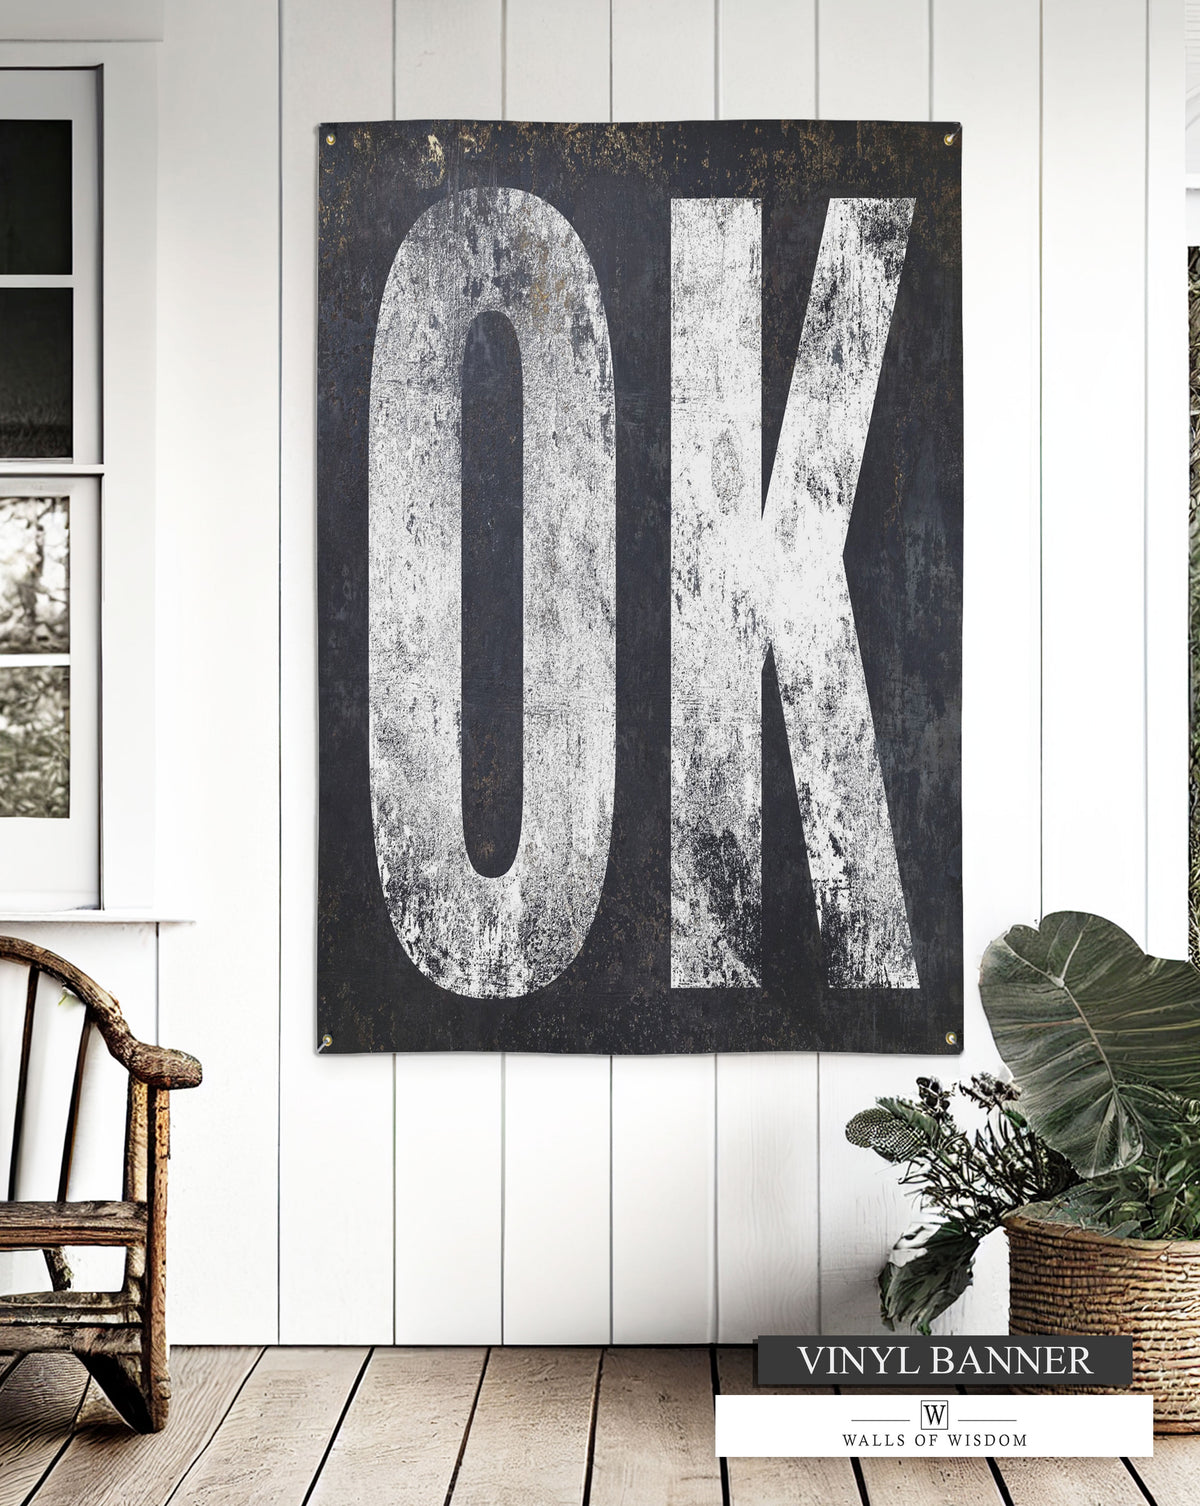 Durable Vinyl Sign Featuring Distressed Typography for Oklahoma-Themed Decor